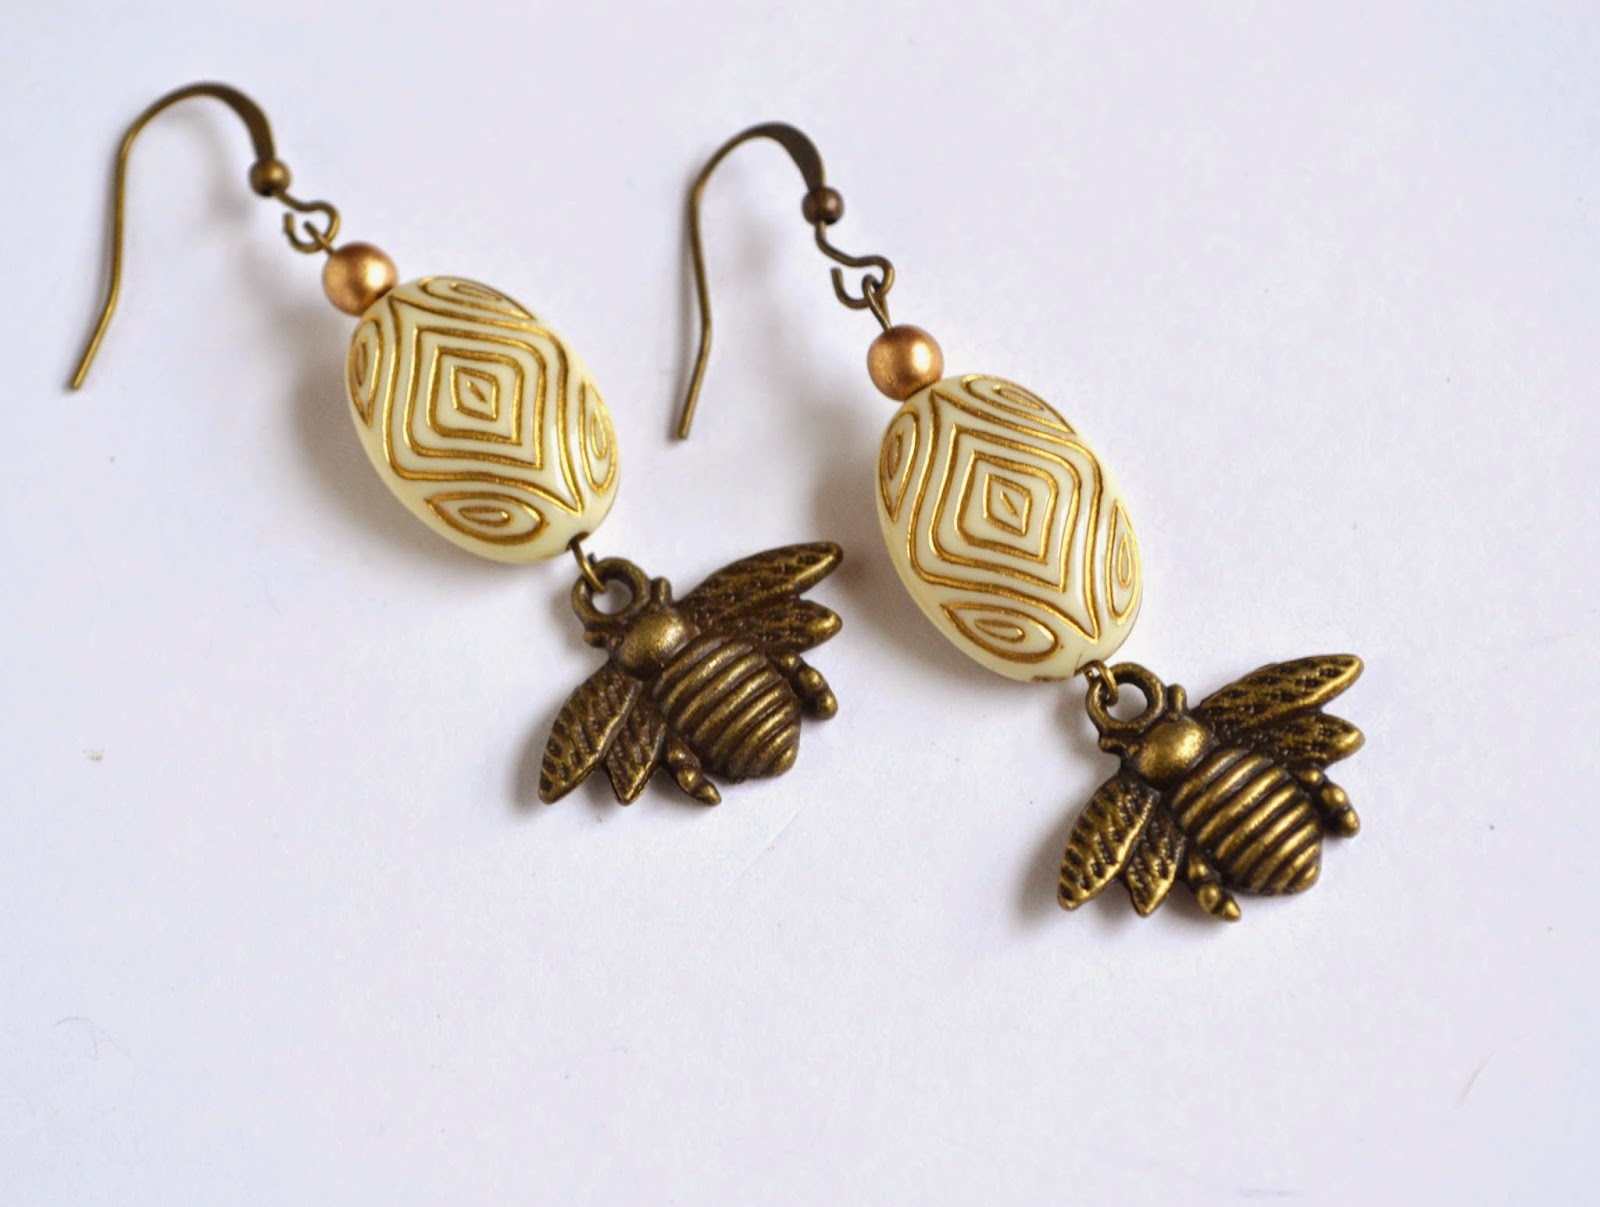 https://www.etsy.com/listing/75885541/bee-earrings-honey-bee-jewelry-bees?ref=shop_home_active_22